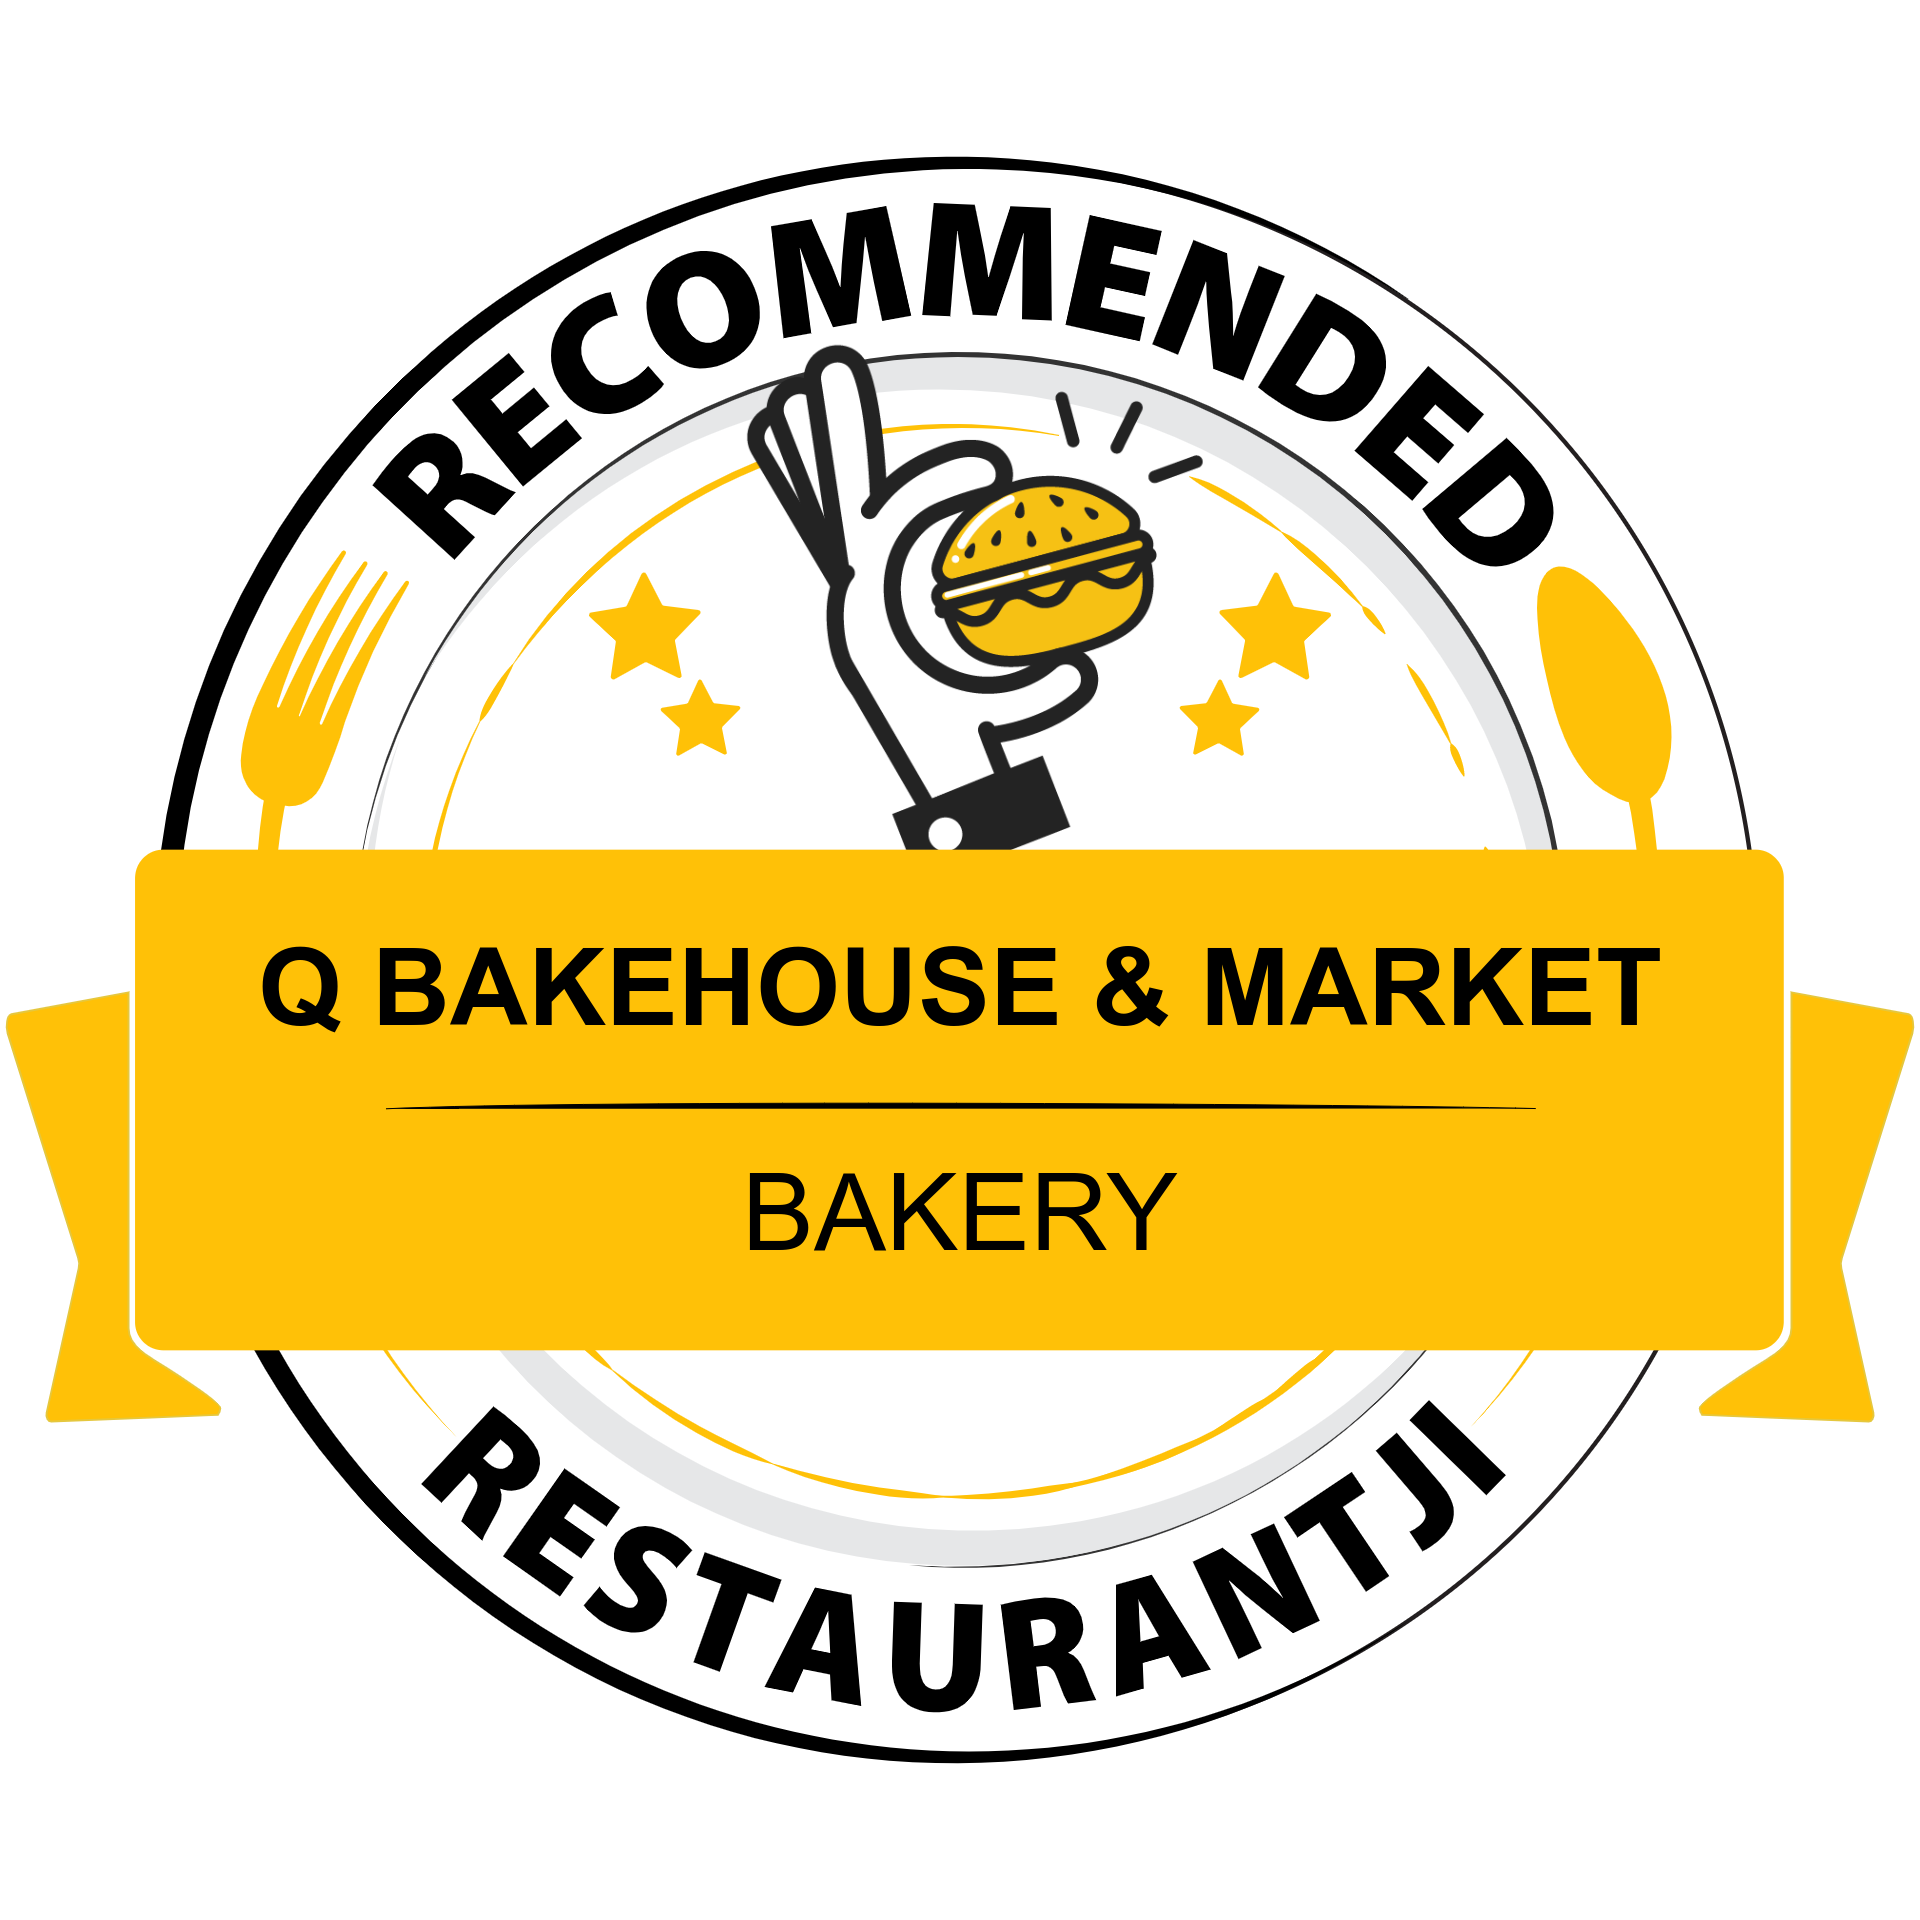 Q Bakehouse & Market has earned accolades from Restaurantji - your dining guide to local food gems.